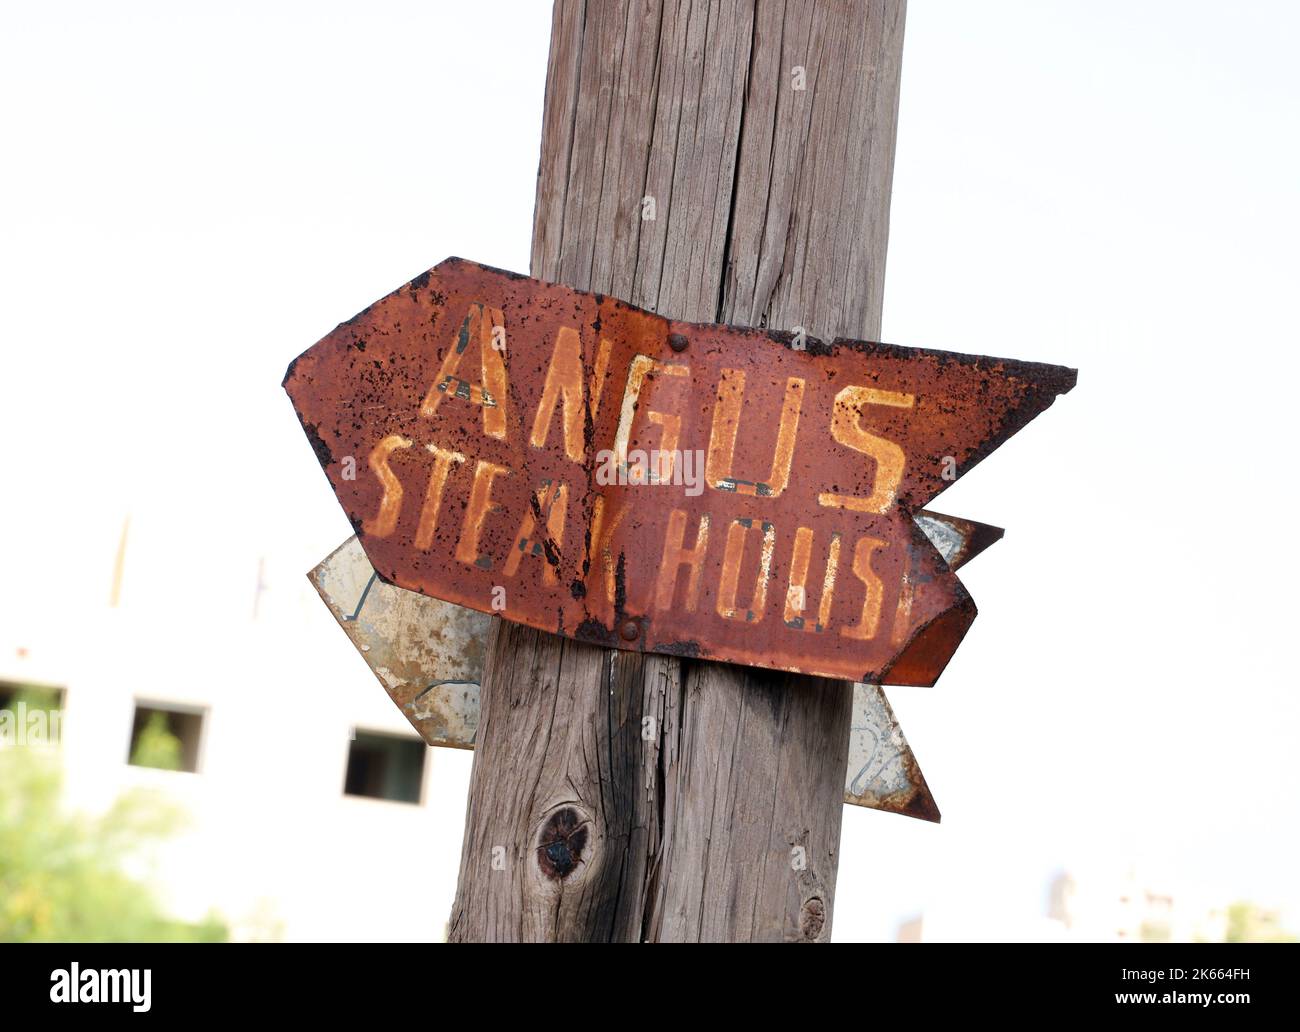 Sign pointing to Angus Steakhouse in Varosha Ghost Town; Famagusta (Gazimagusa); Turkish Replublic of Northern Cyprus Stock Photo